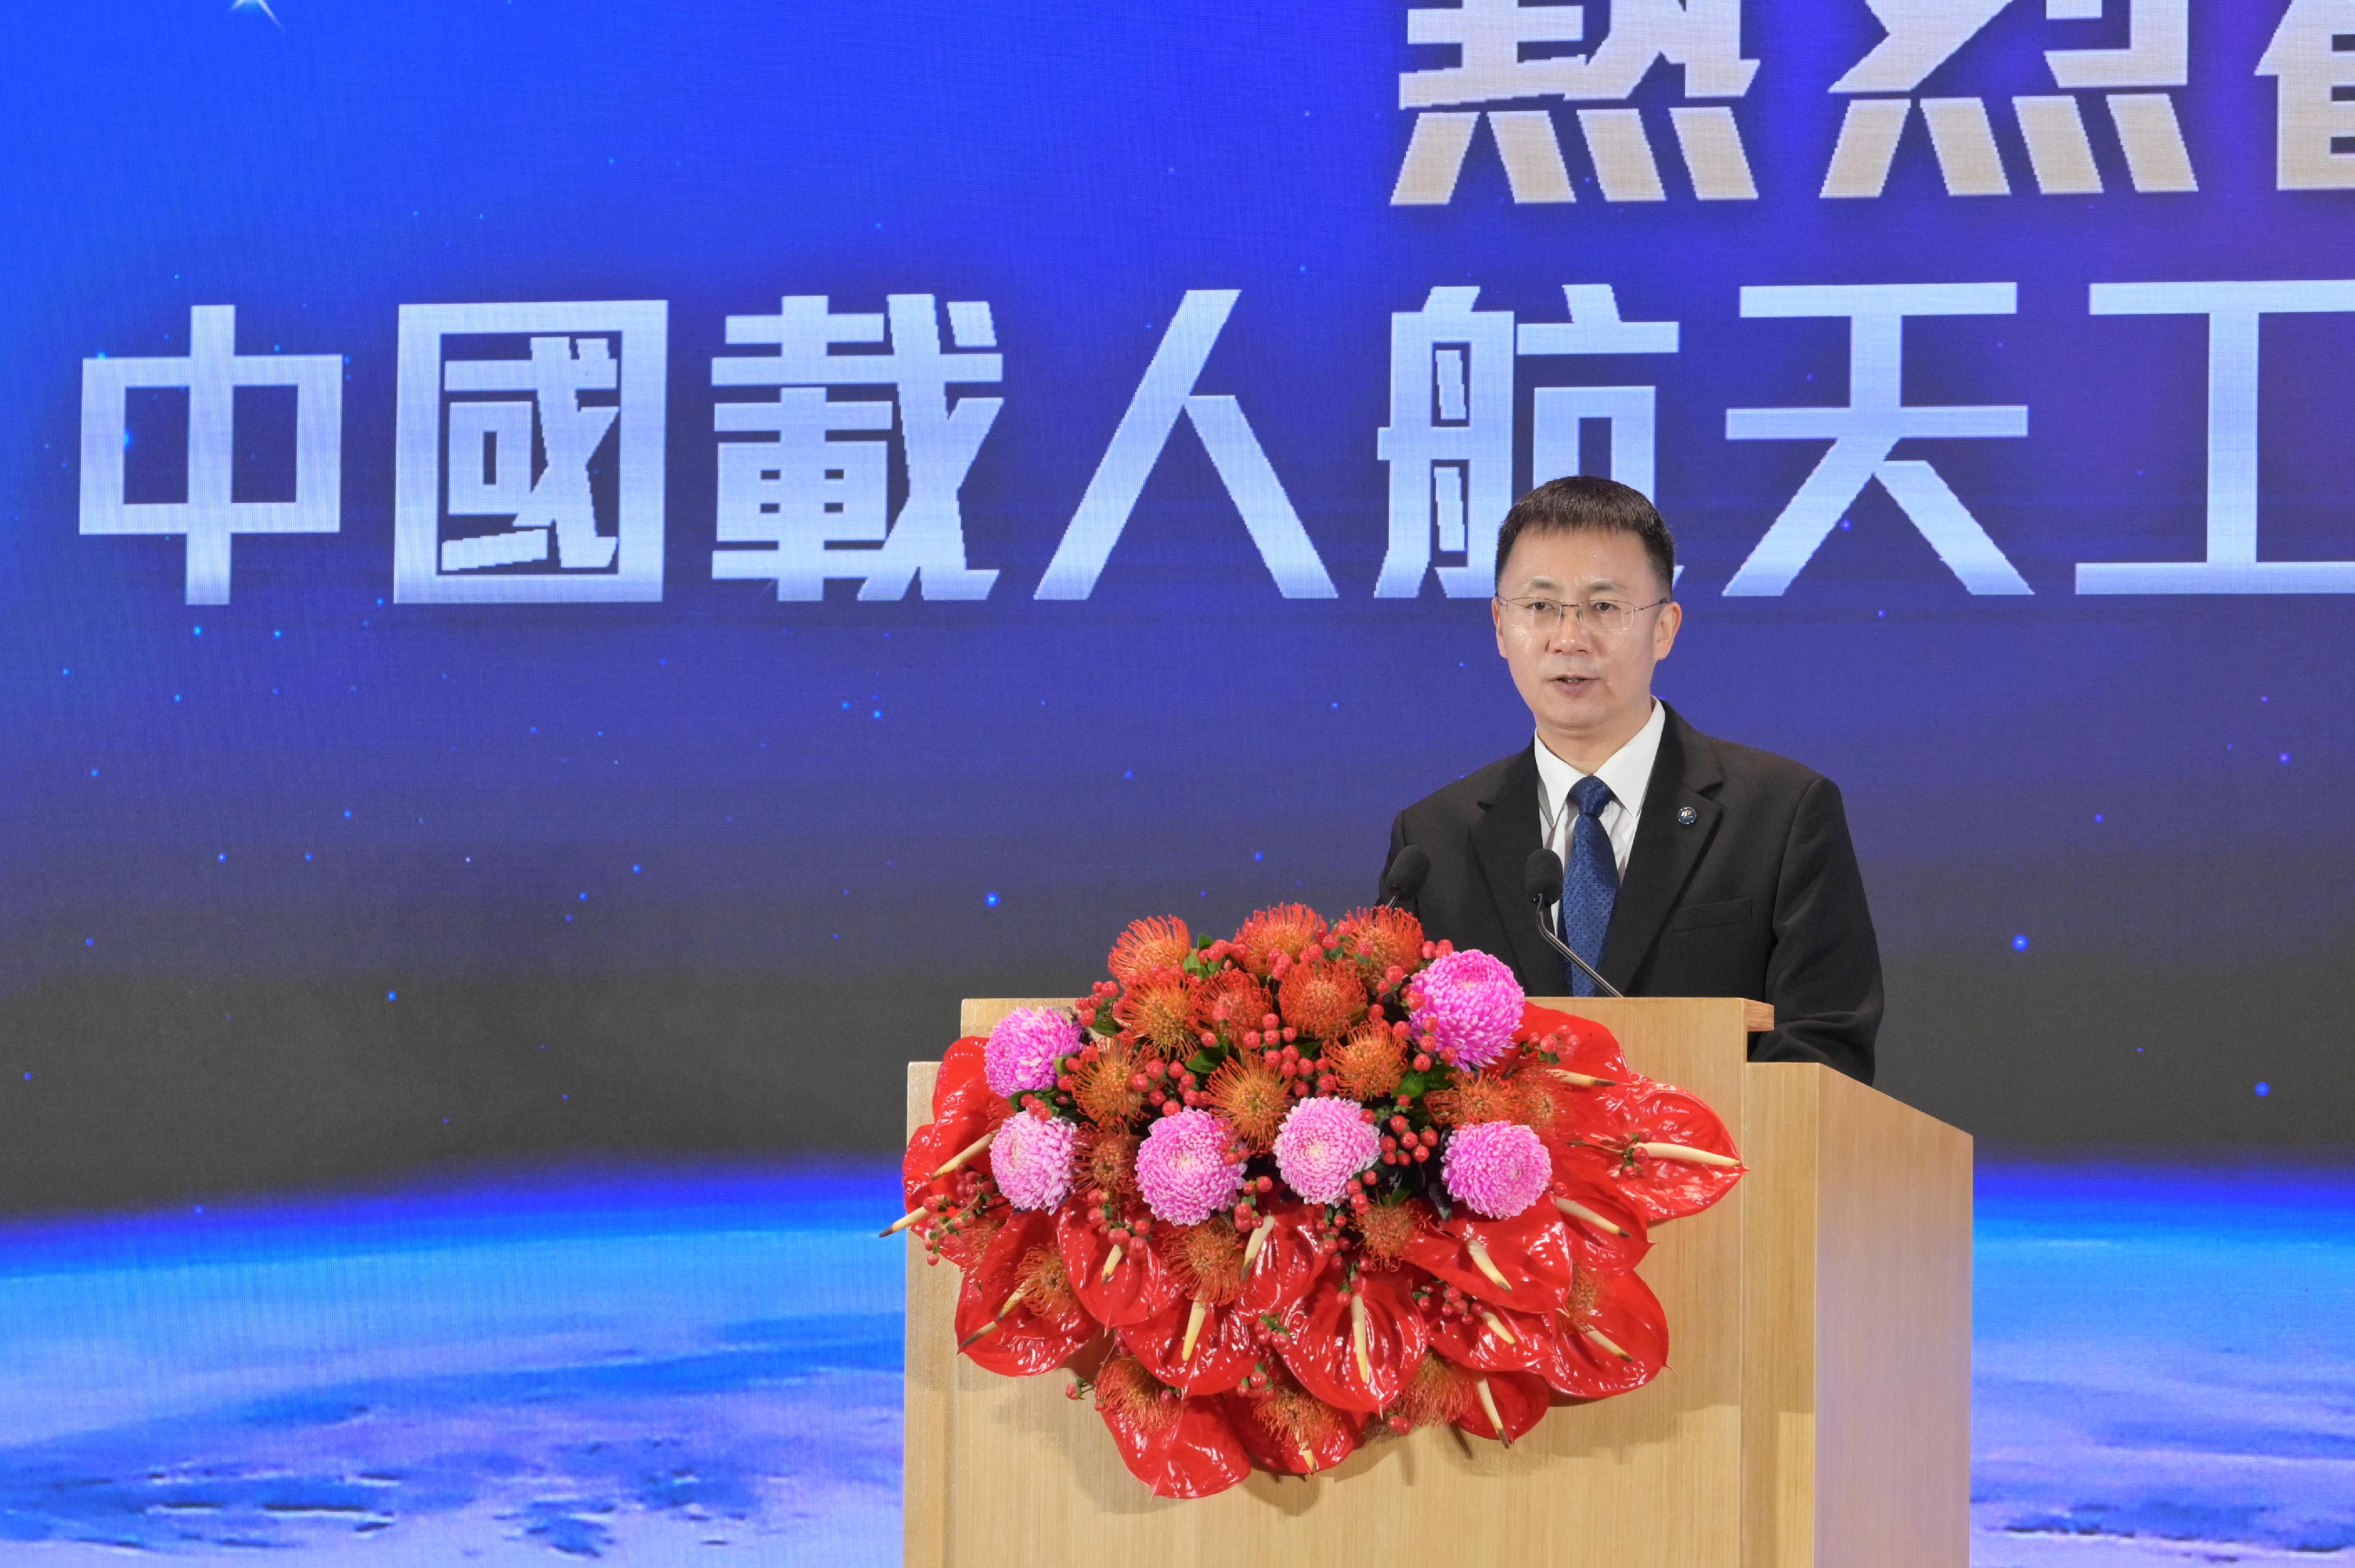 A China Manned Space delegation arrived in Hong Kong for a four-day visit today (November 28). Photo shows the leader of the delegation and the Deputy Director General of the China Manned Space Agency, Mr Lin Xiqiang, delivering a speech at the welcome banquet.